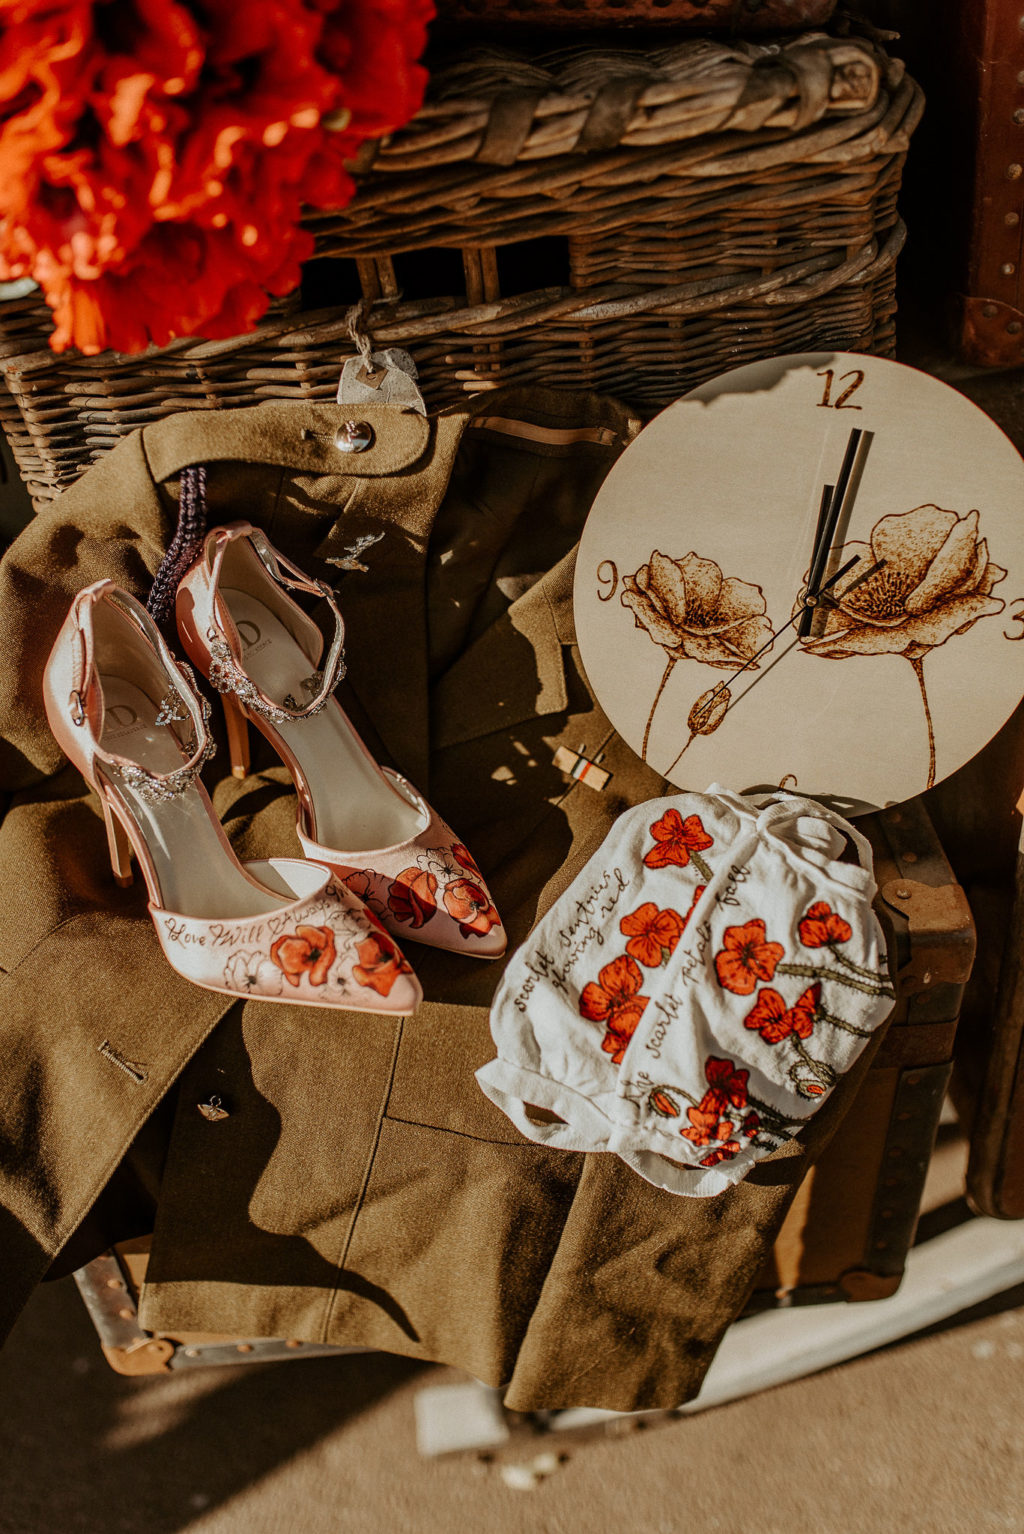 Vintage Railway Wedding Inspiration For 'The Poppy Appeal' 